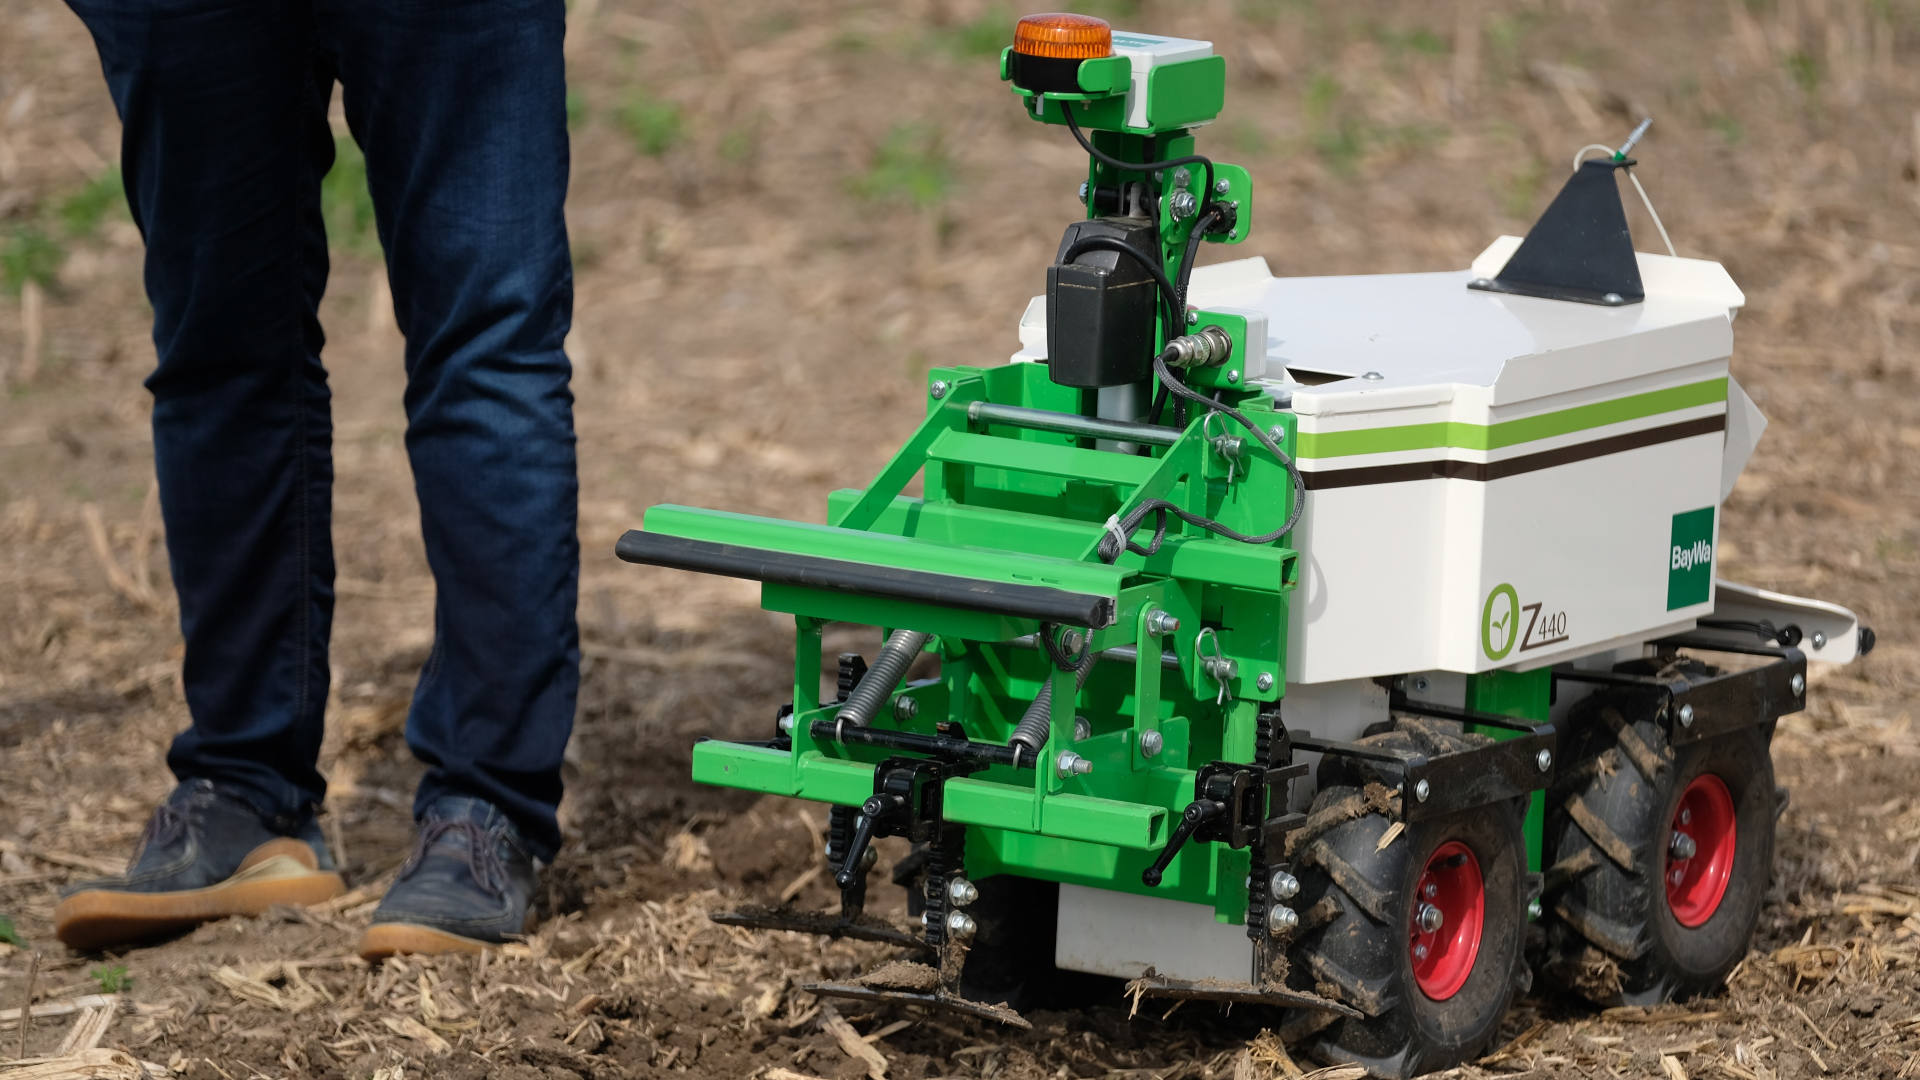 The "OZ" field robot, which can independently work the soil or remove weeds, at a technology show in a field in northern Saxony, Germany.